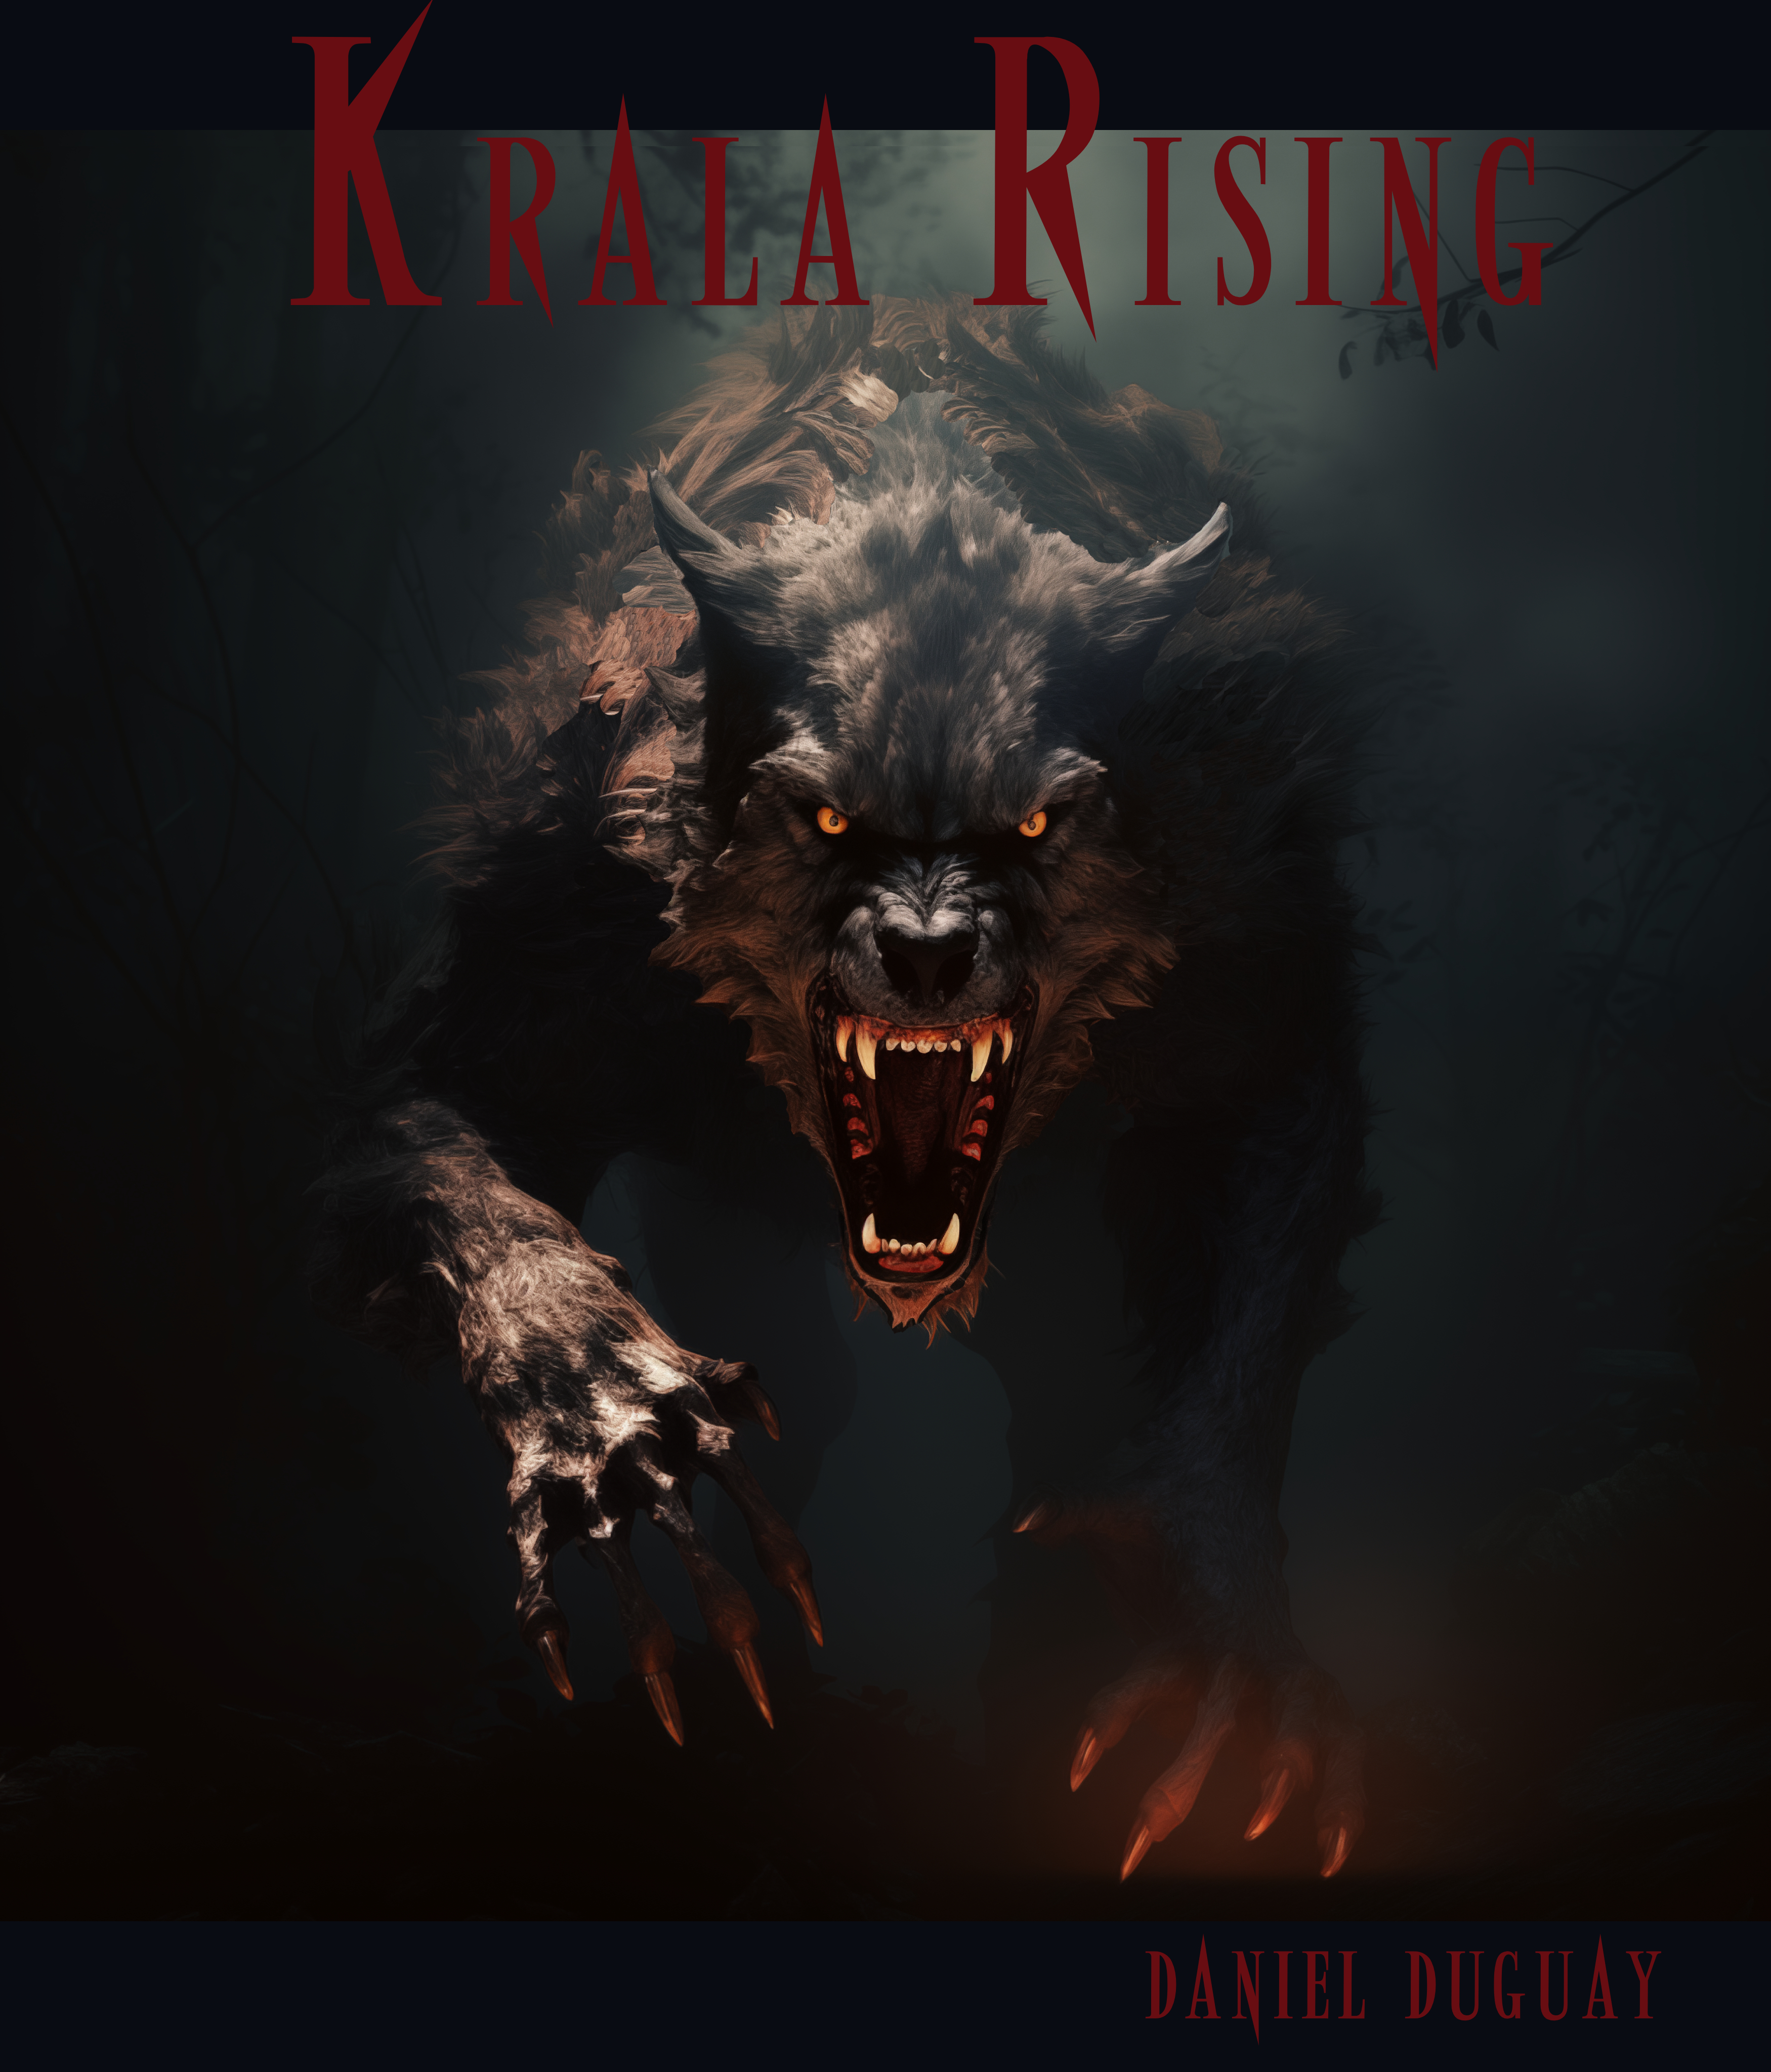 Krala Rising The Chains that Bind Book 1 by Daniel Duguay cover